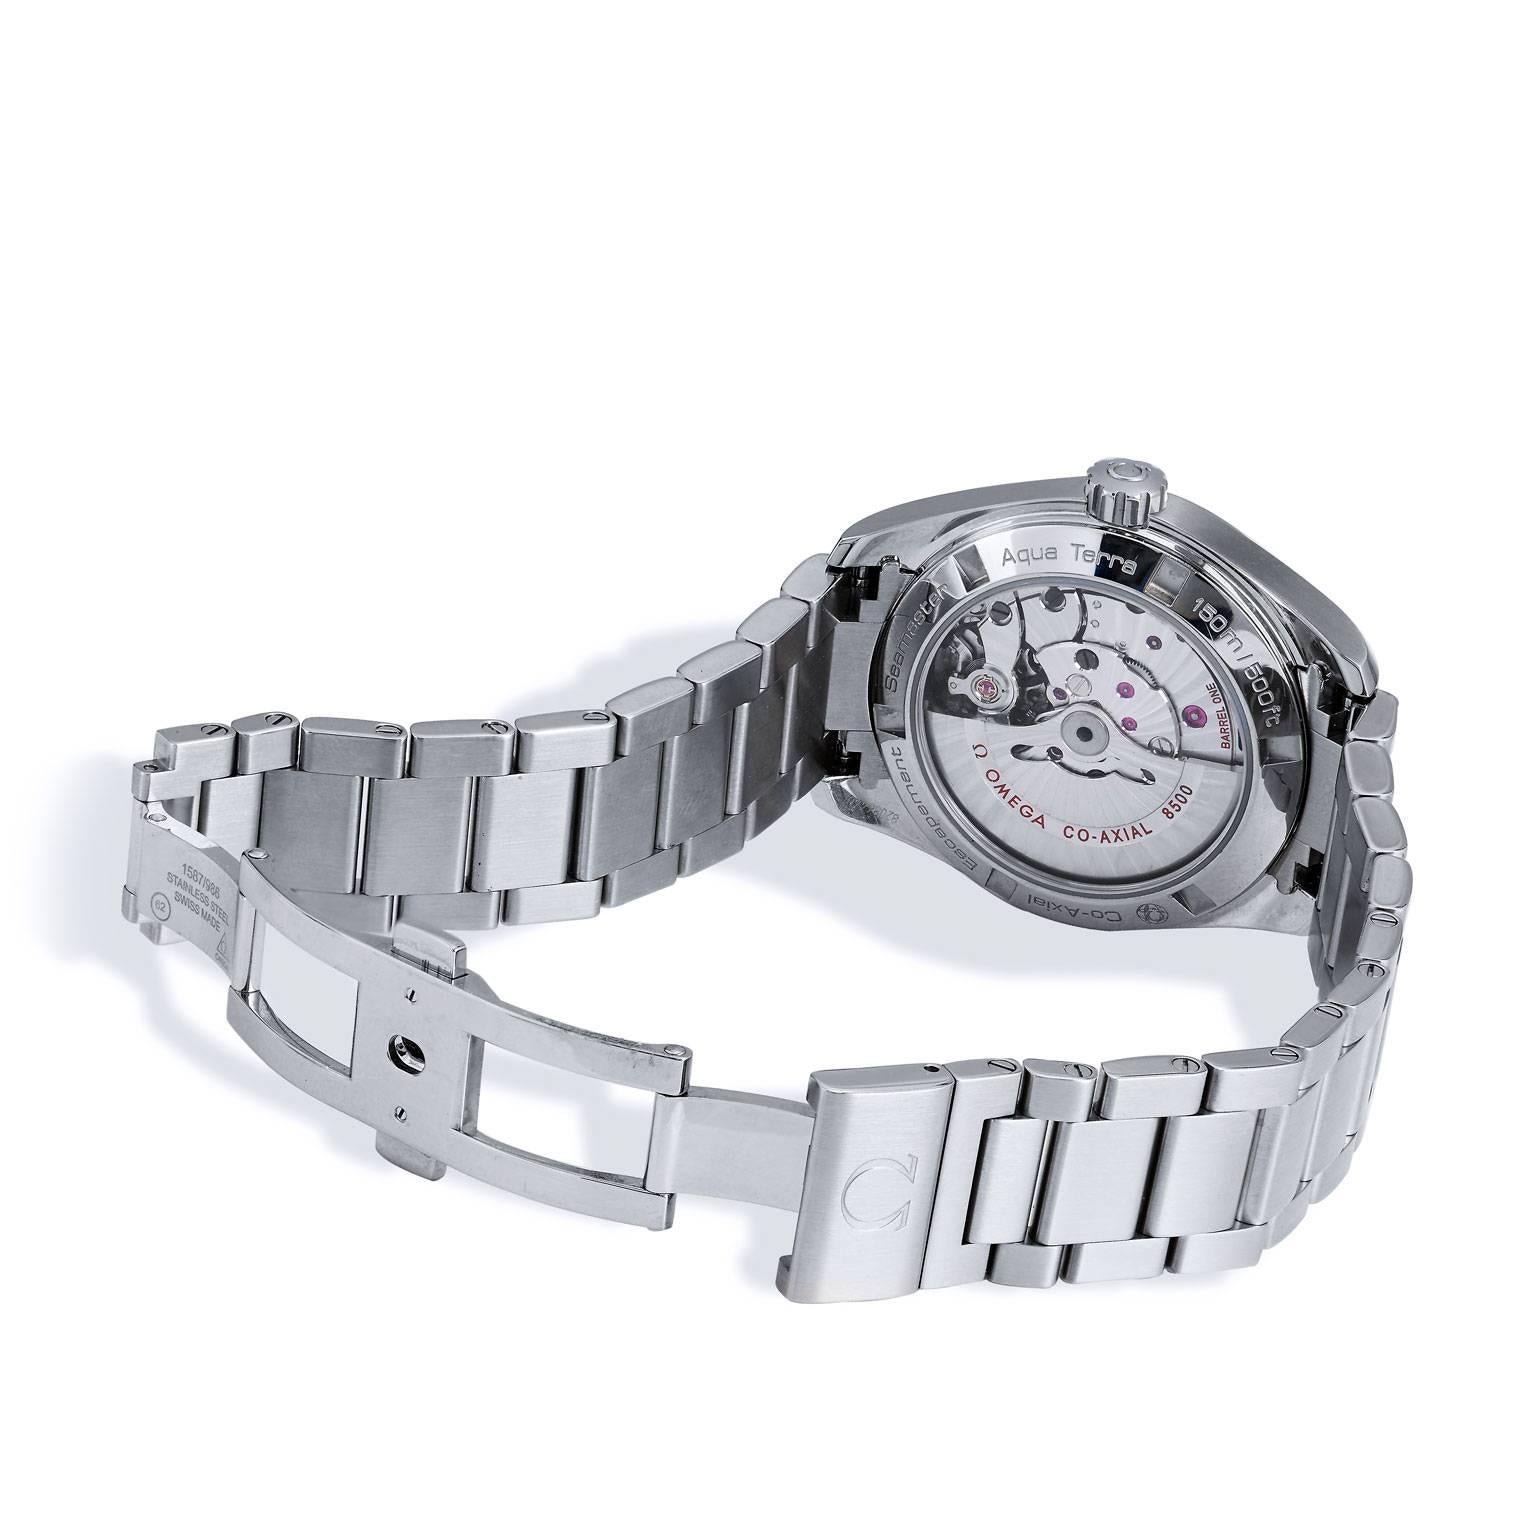 Stainless steel case with a stainless steel bracelet. Fixed stainless steel bezel. Silver dial with luminous silver and white hands and index hour markers. Minute markers around the outer rim. Dial Type: Analog. Luminescent hands and markers. Date